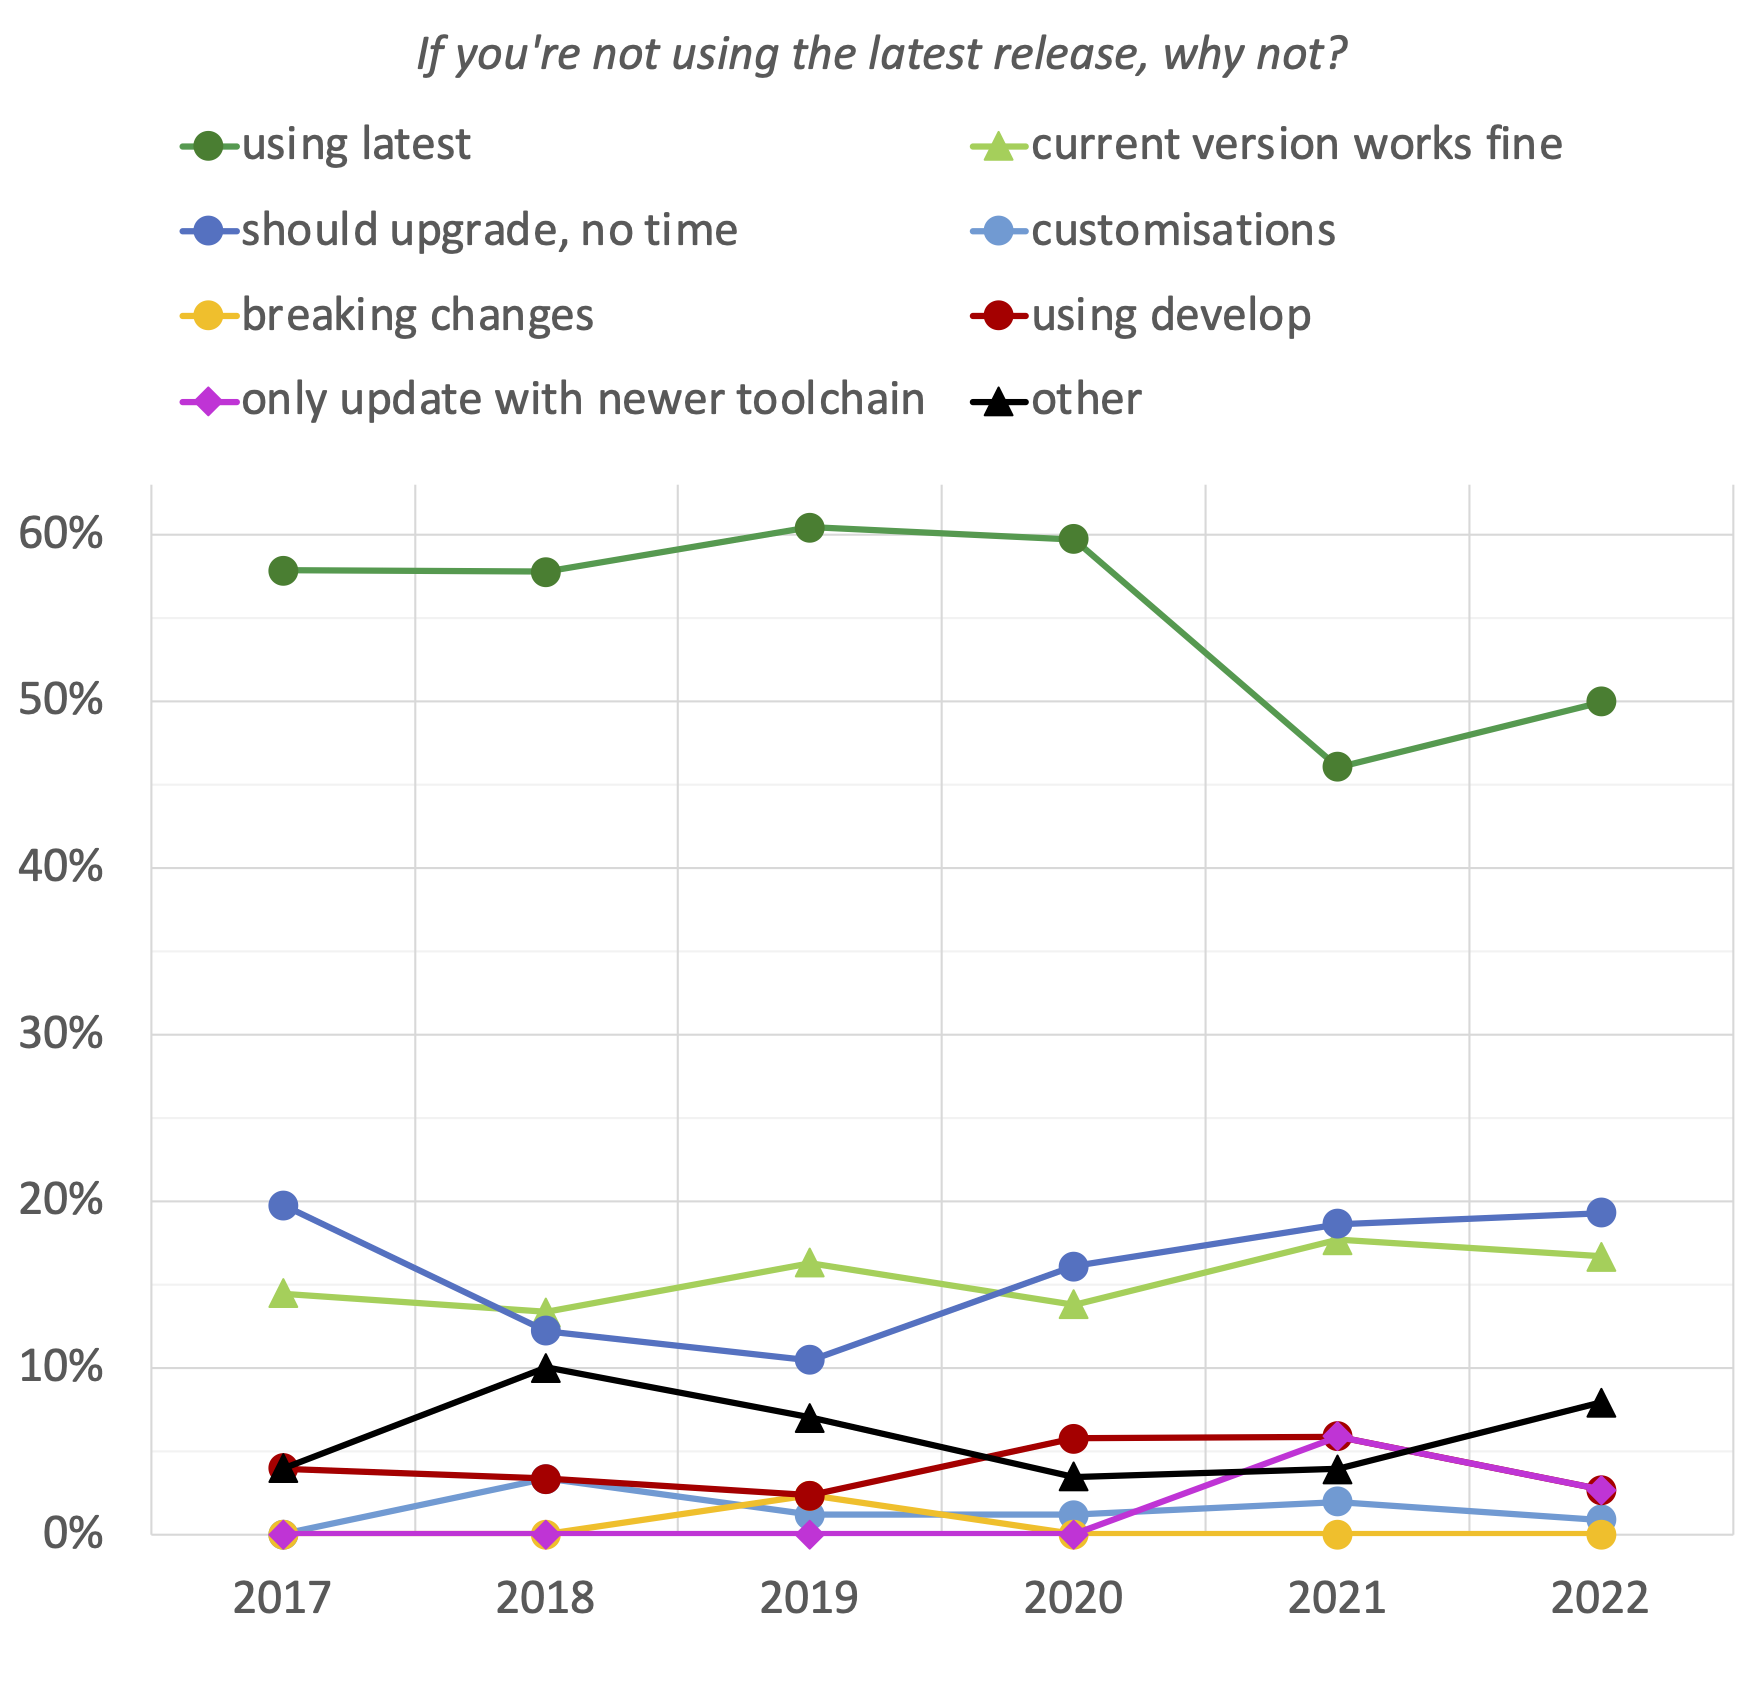 19. If you're not using the latest release, why not? (evolution since 2017)